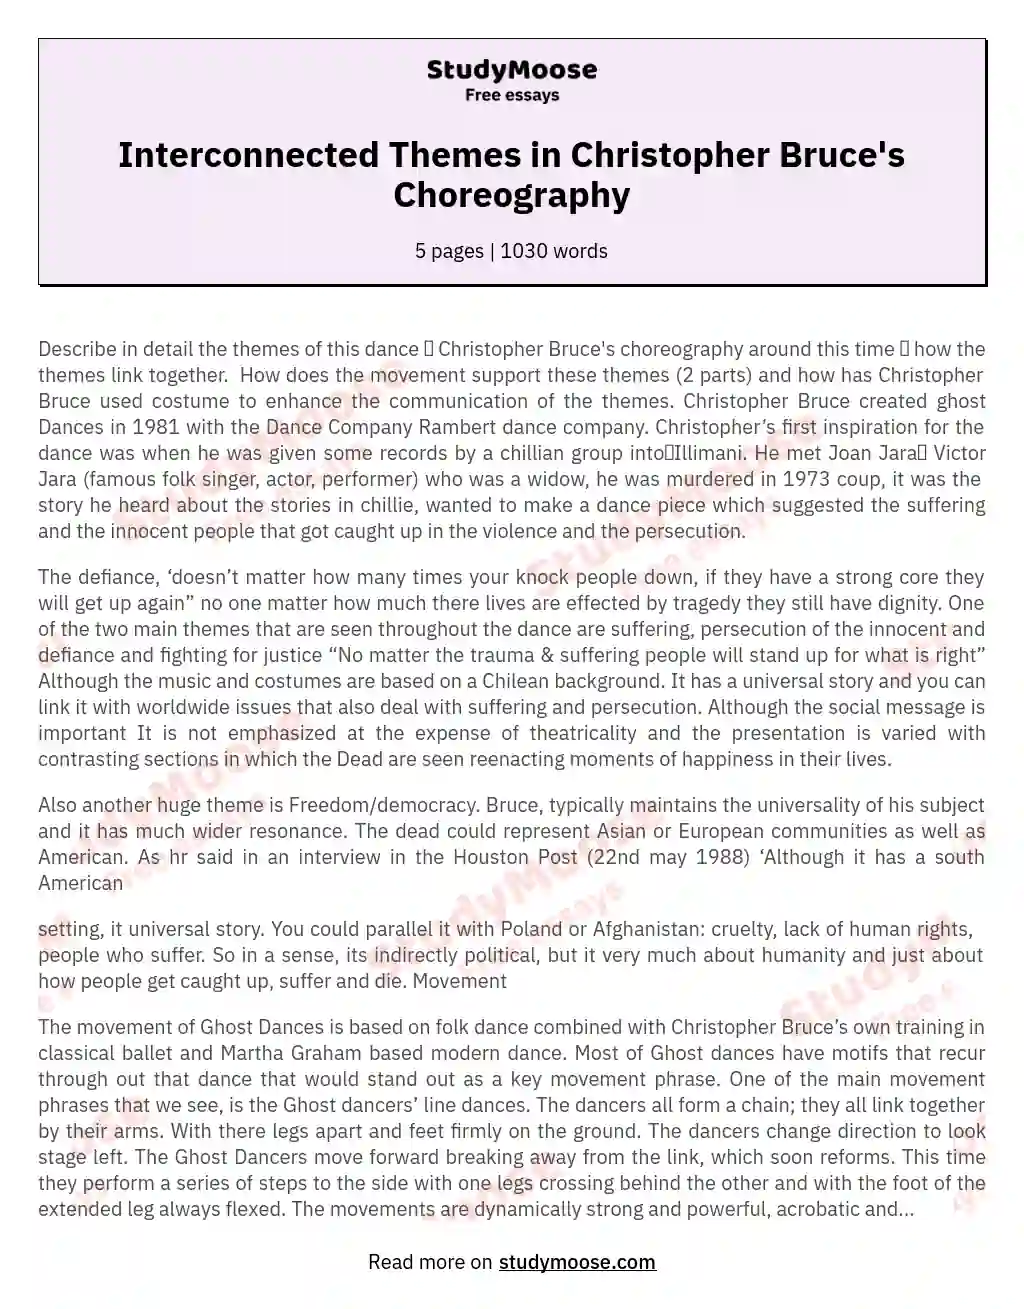 Interconnected Themes in Christopher Bruce's Choreography essay